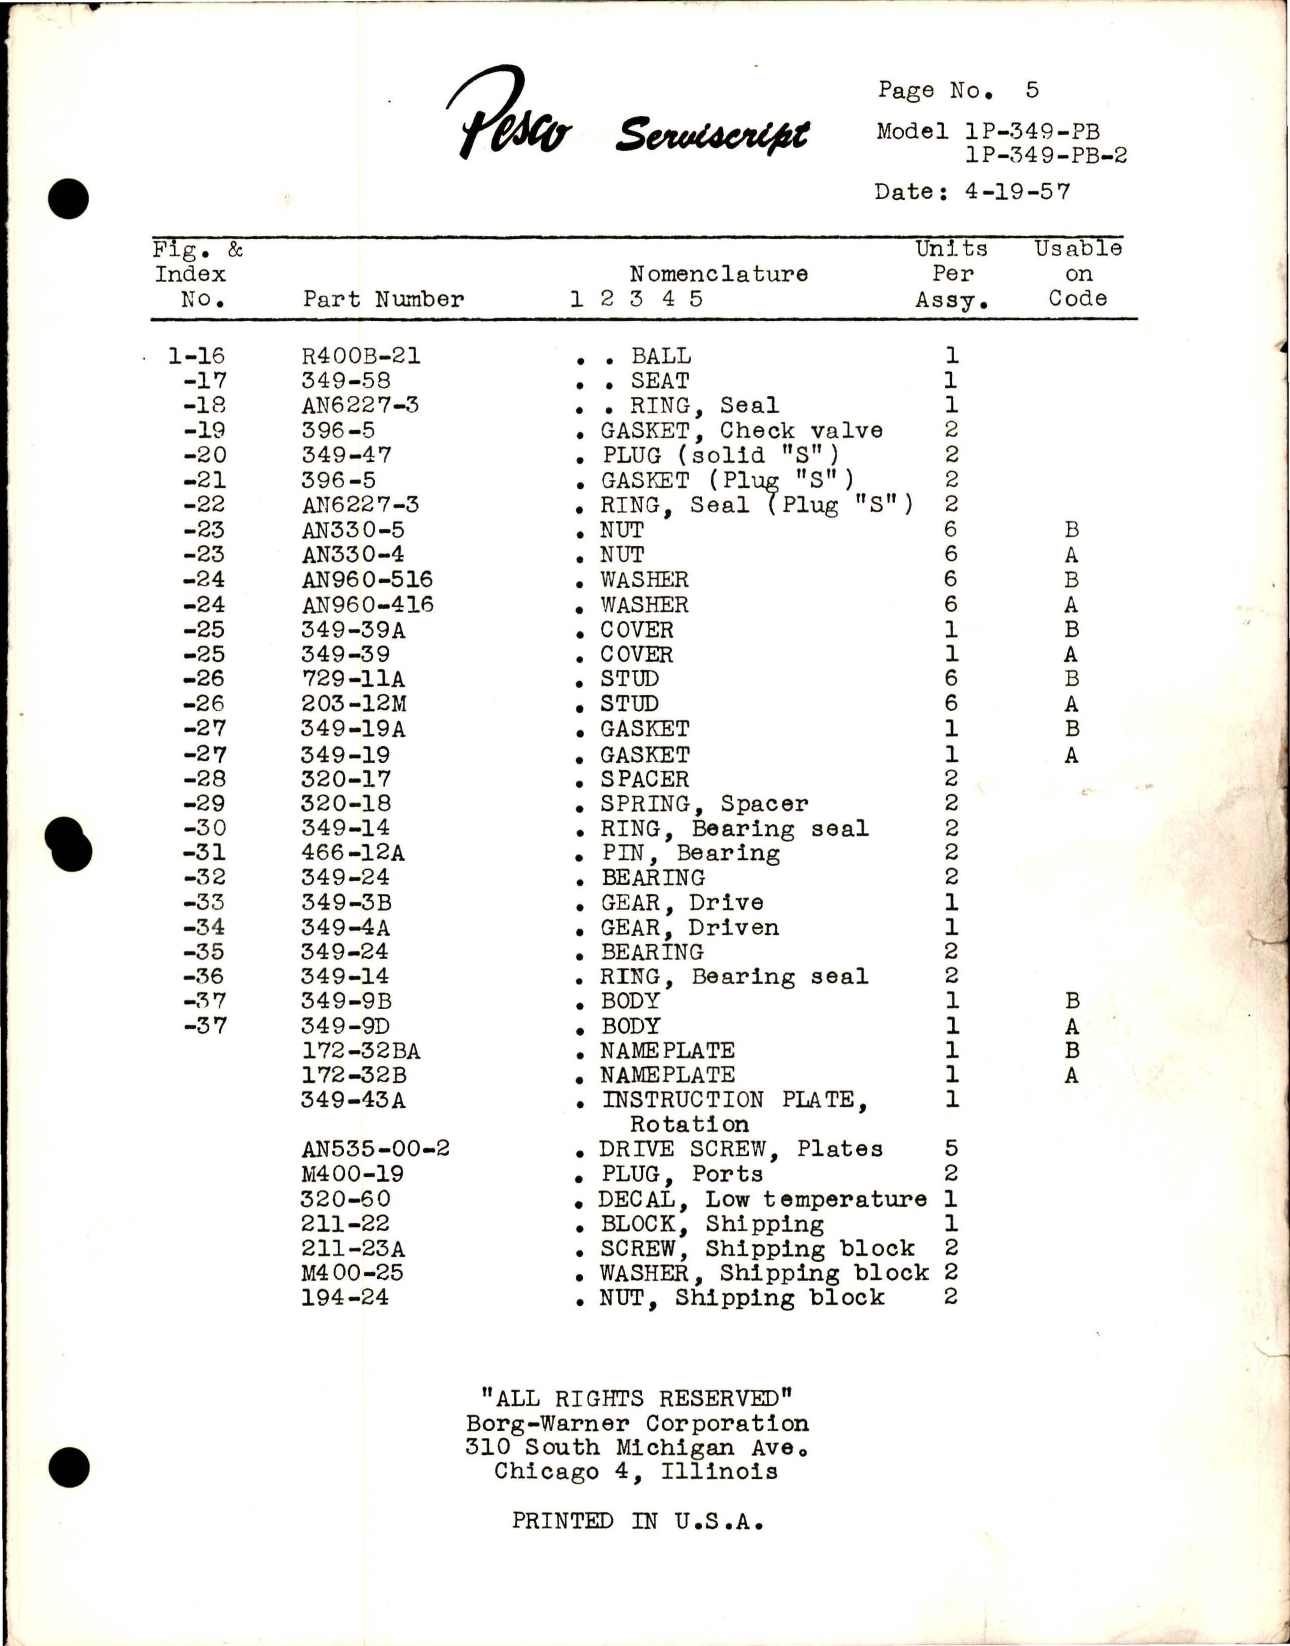 Sample page 5 from AirCorps Library document: Leading Particulars for Hydraulic Pump - Model 1P-349-PB and 1P-349-PB-2 